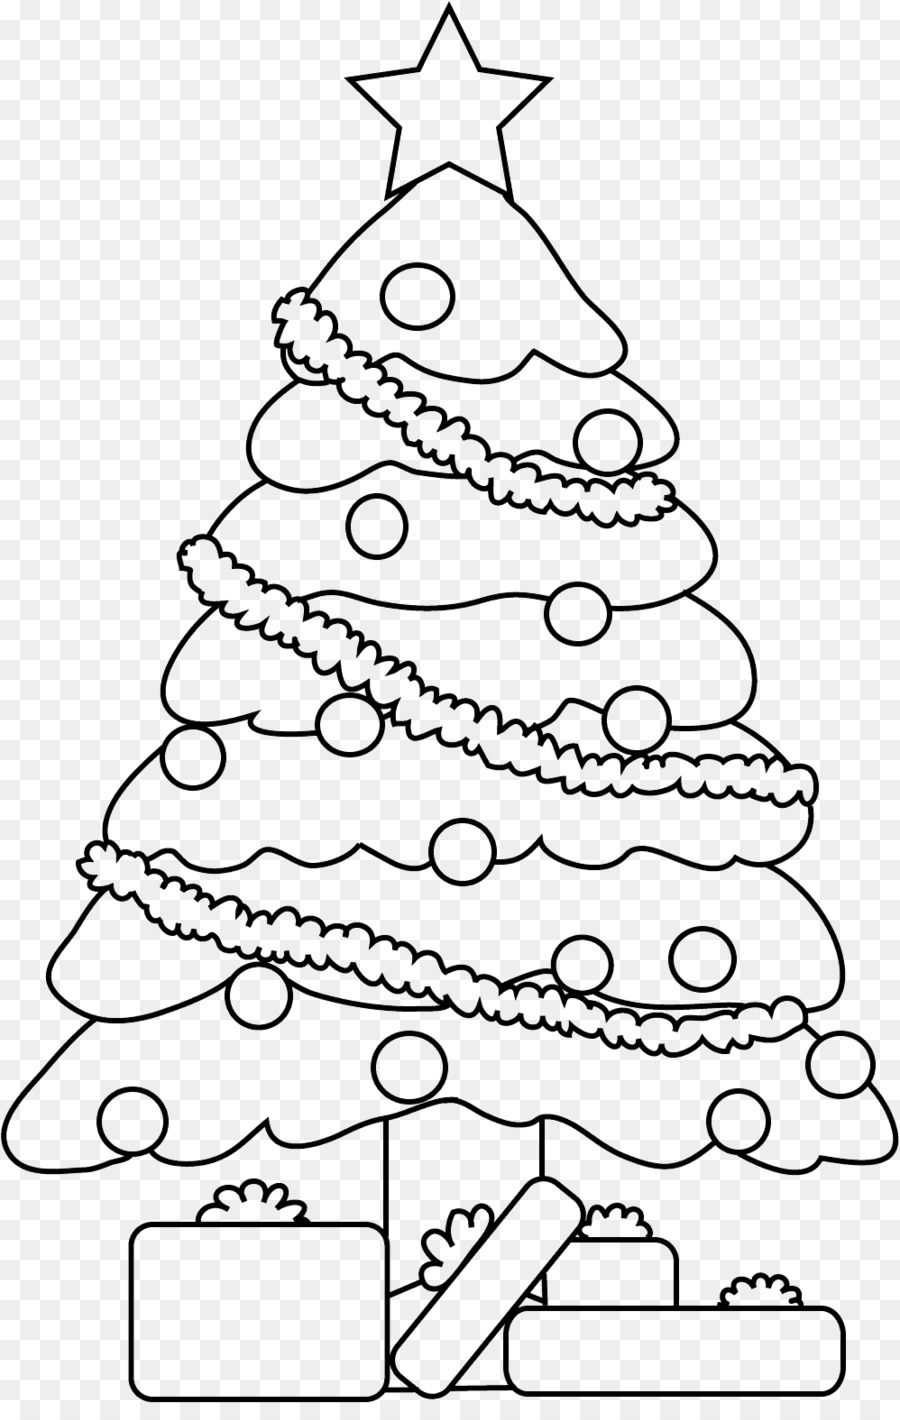 Line art Clip art Drawing Christmas tree - christmas tree png download - 900*1403 - Free Transparent Line Art png Download.